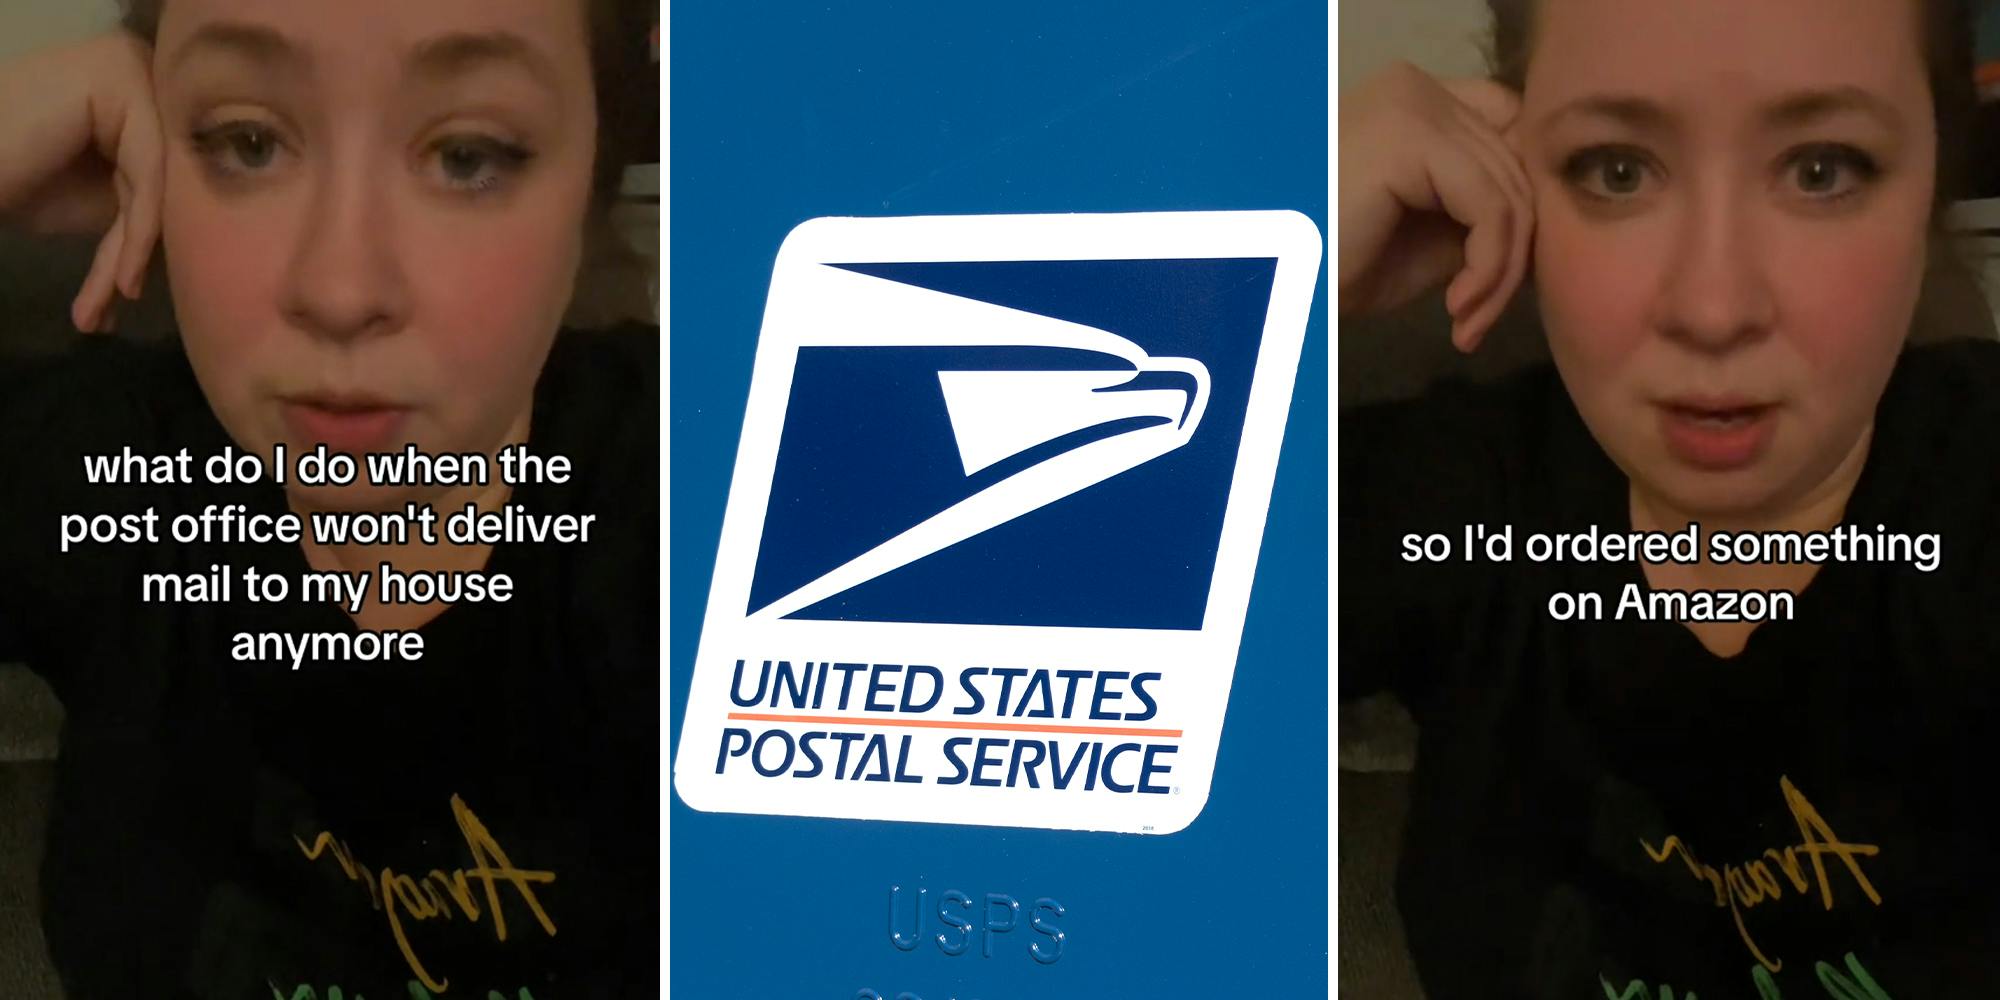 Woman says USPS won’t deliver to her house because a worker got bitten by a dog. She doesn’t have one